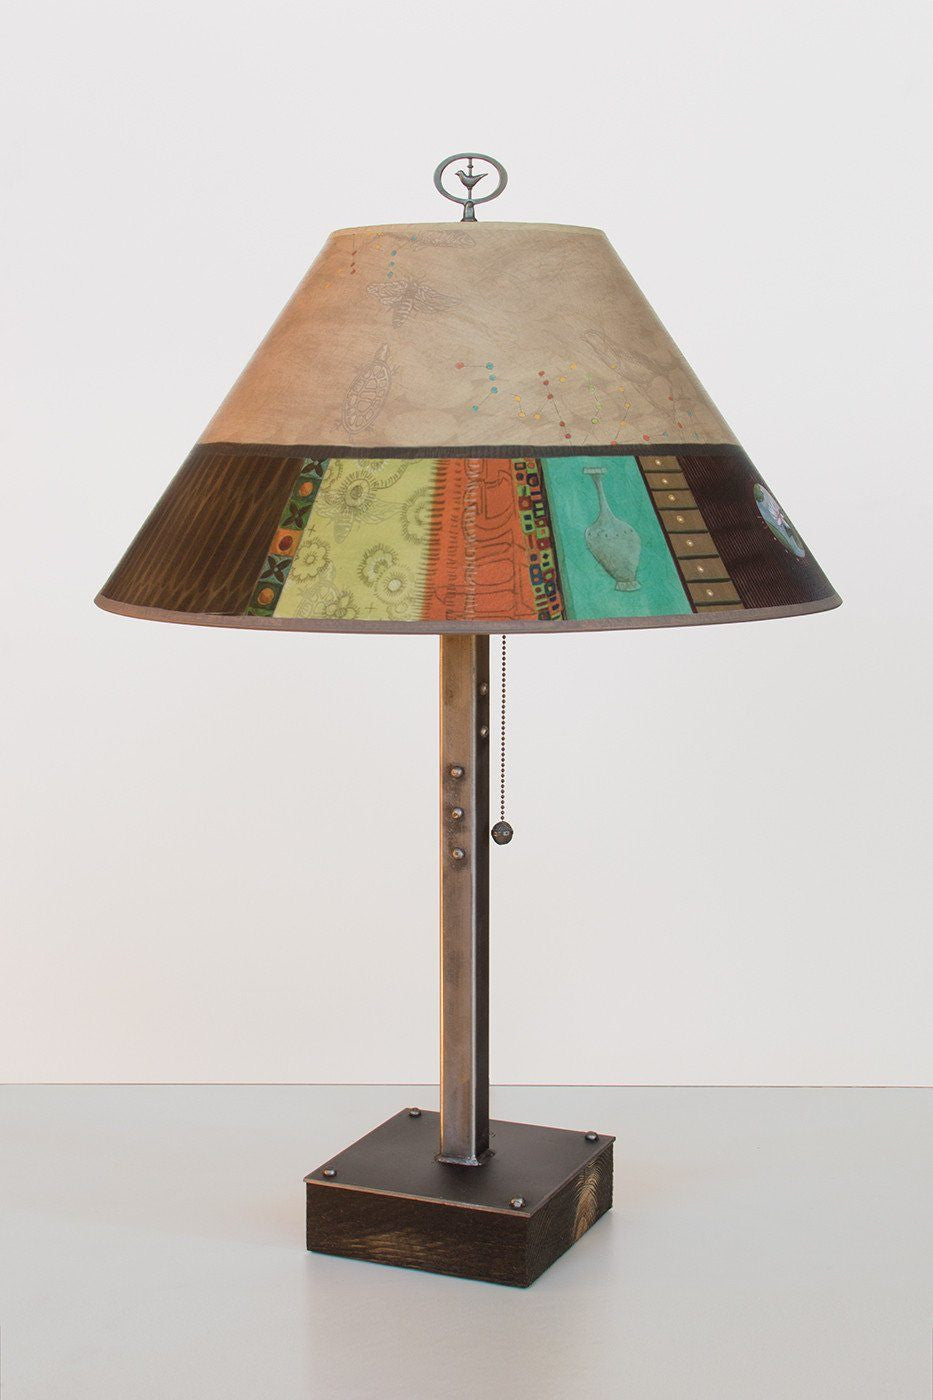 Steel Table Lamp on Wood with Large Conical Shade in Linen Match